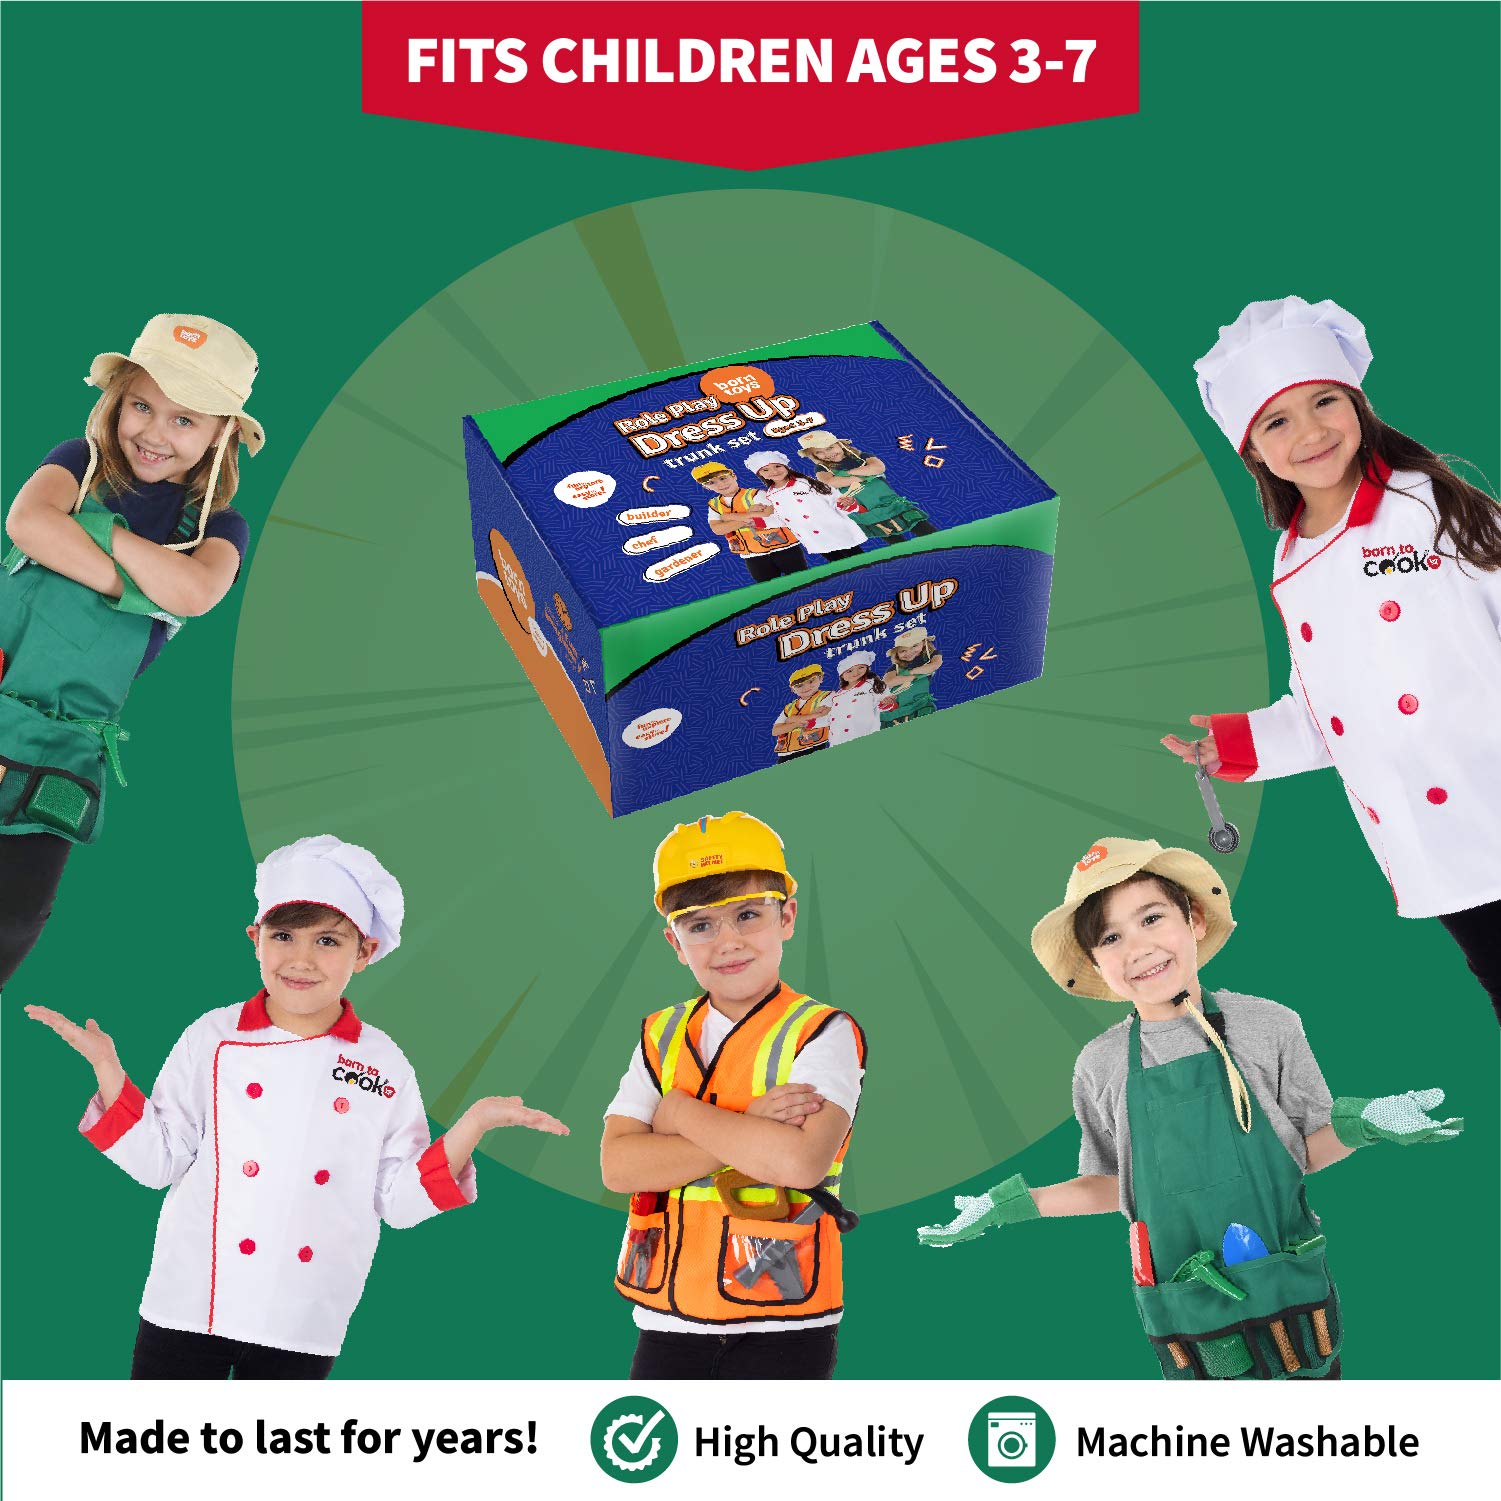 Born Toys Kids' Dress Up & Pretend Play Set - Ages 3-7 - Chef + Construction Worker + Gardener | Kids Costumes for Boys & Girls | Kids Dress Up Clothes for Play | Girls/Boys Dress Up Costumes for Play